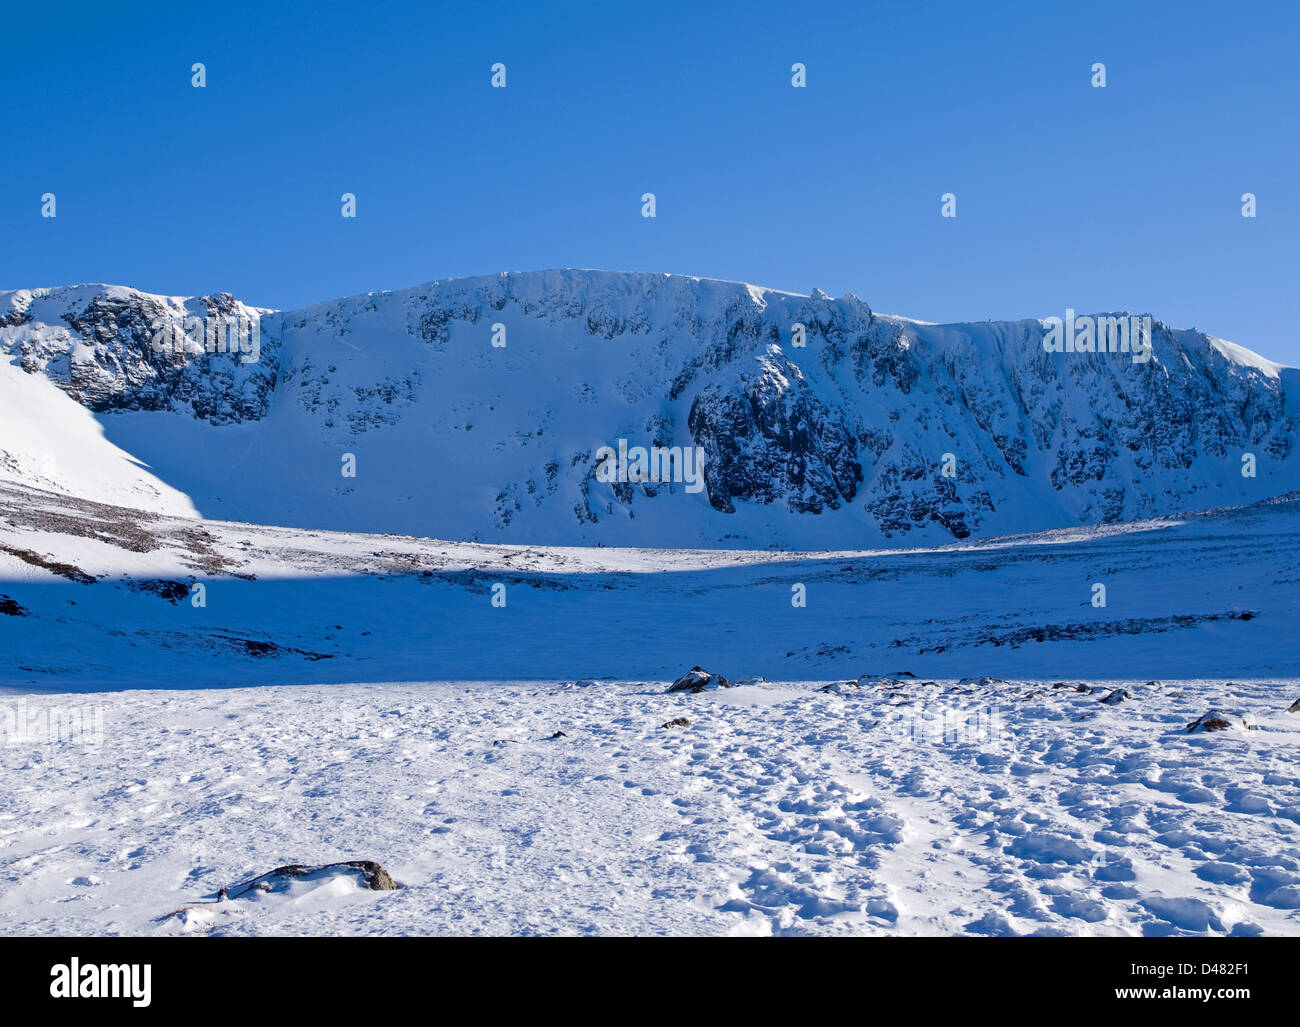 Coire an t-Sneachda in snow, the Northern Corries, Cairngorms National Park, Scottish Highlands, winter, Scotland UK Stock Photo